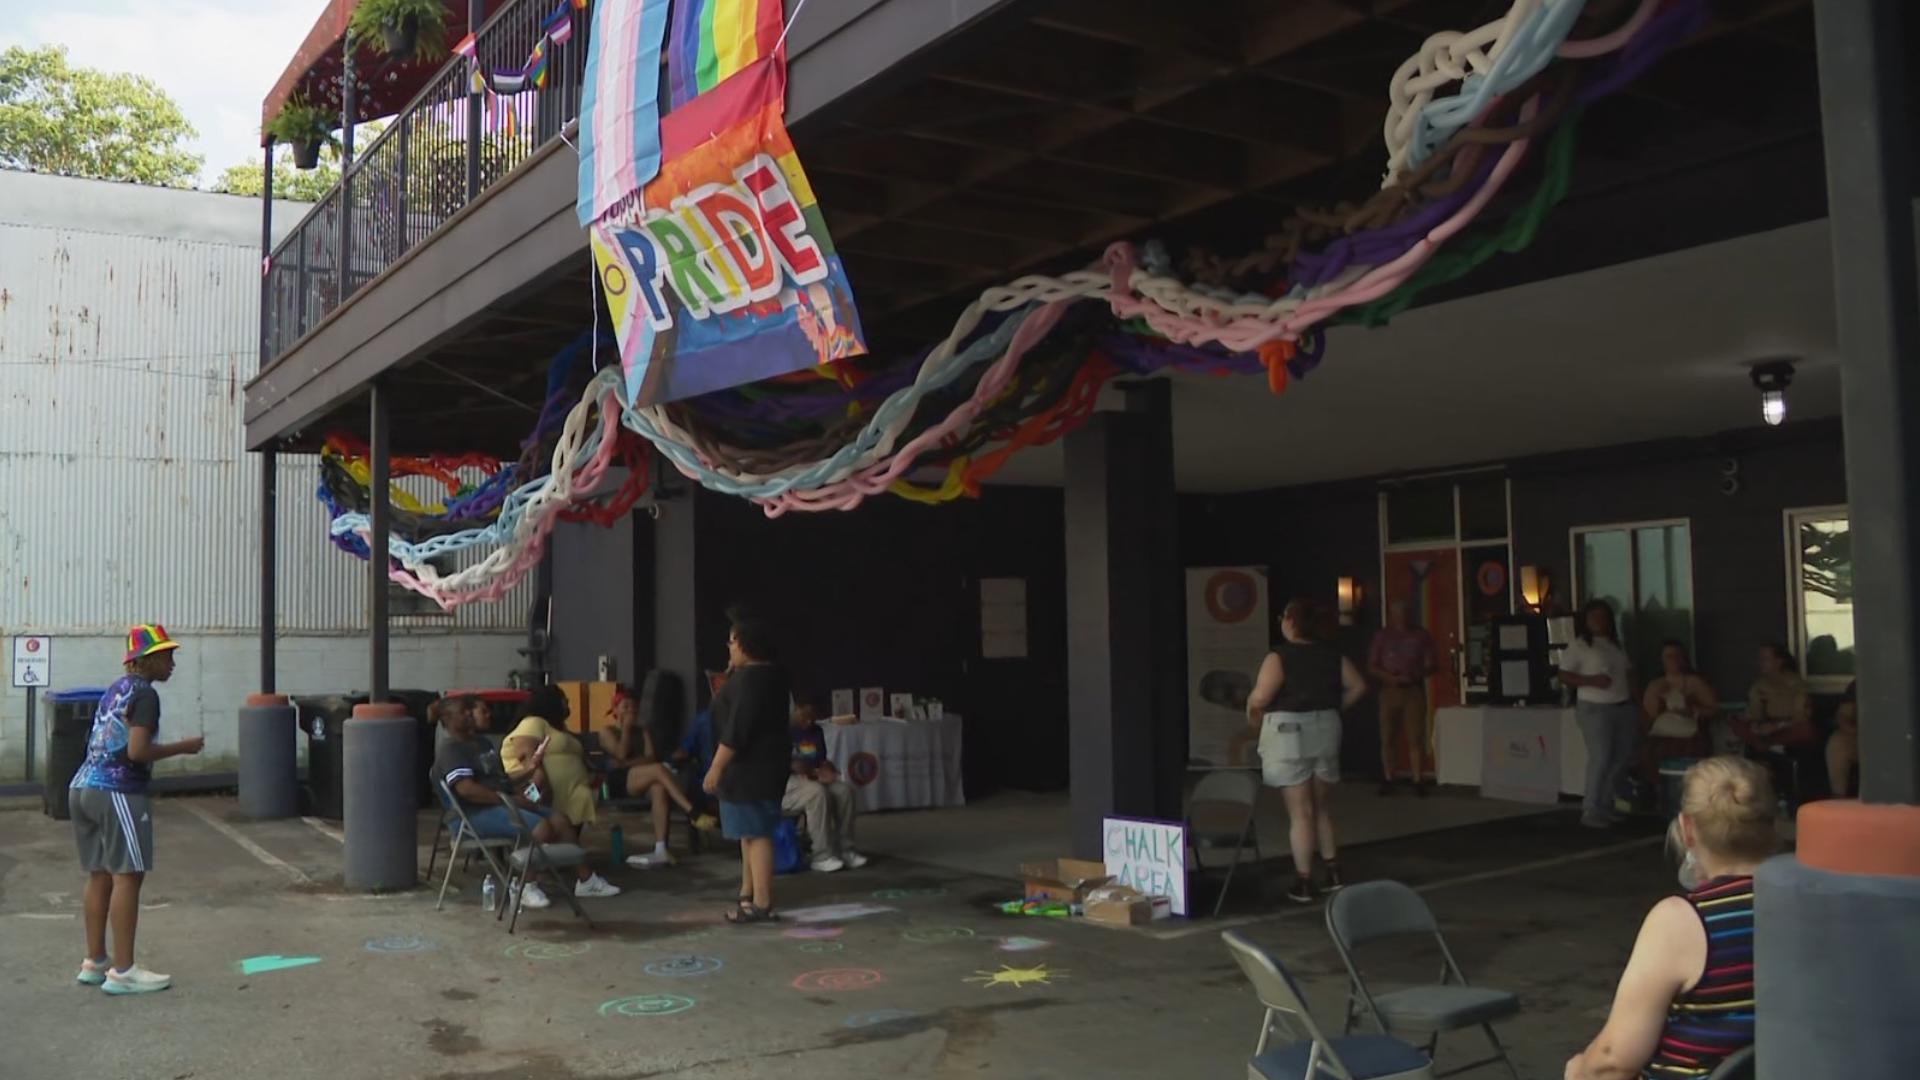 As pride month comes to a close, Louisville organizations are reminding LGBTQ youth that resources and safe spaces for them are available year round.